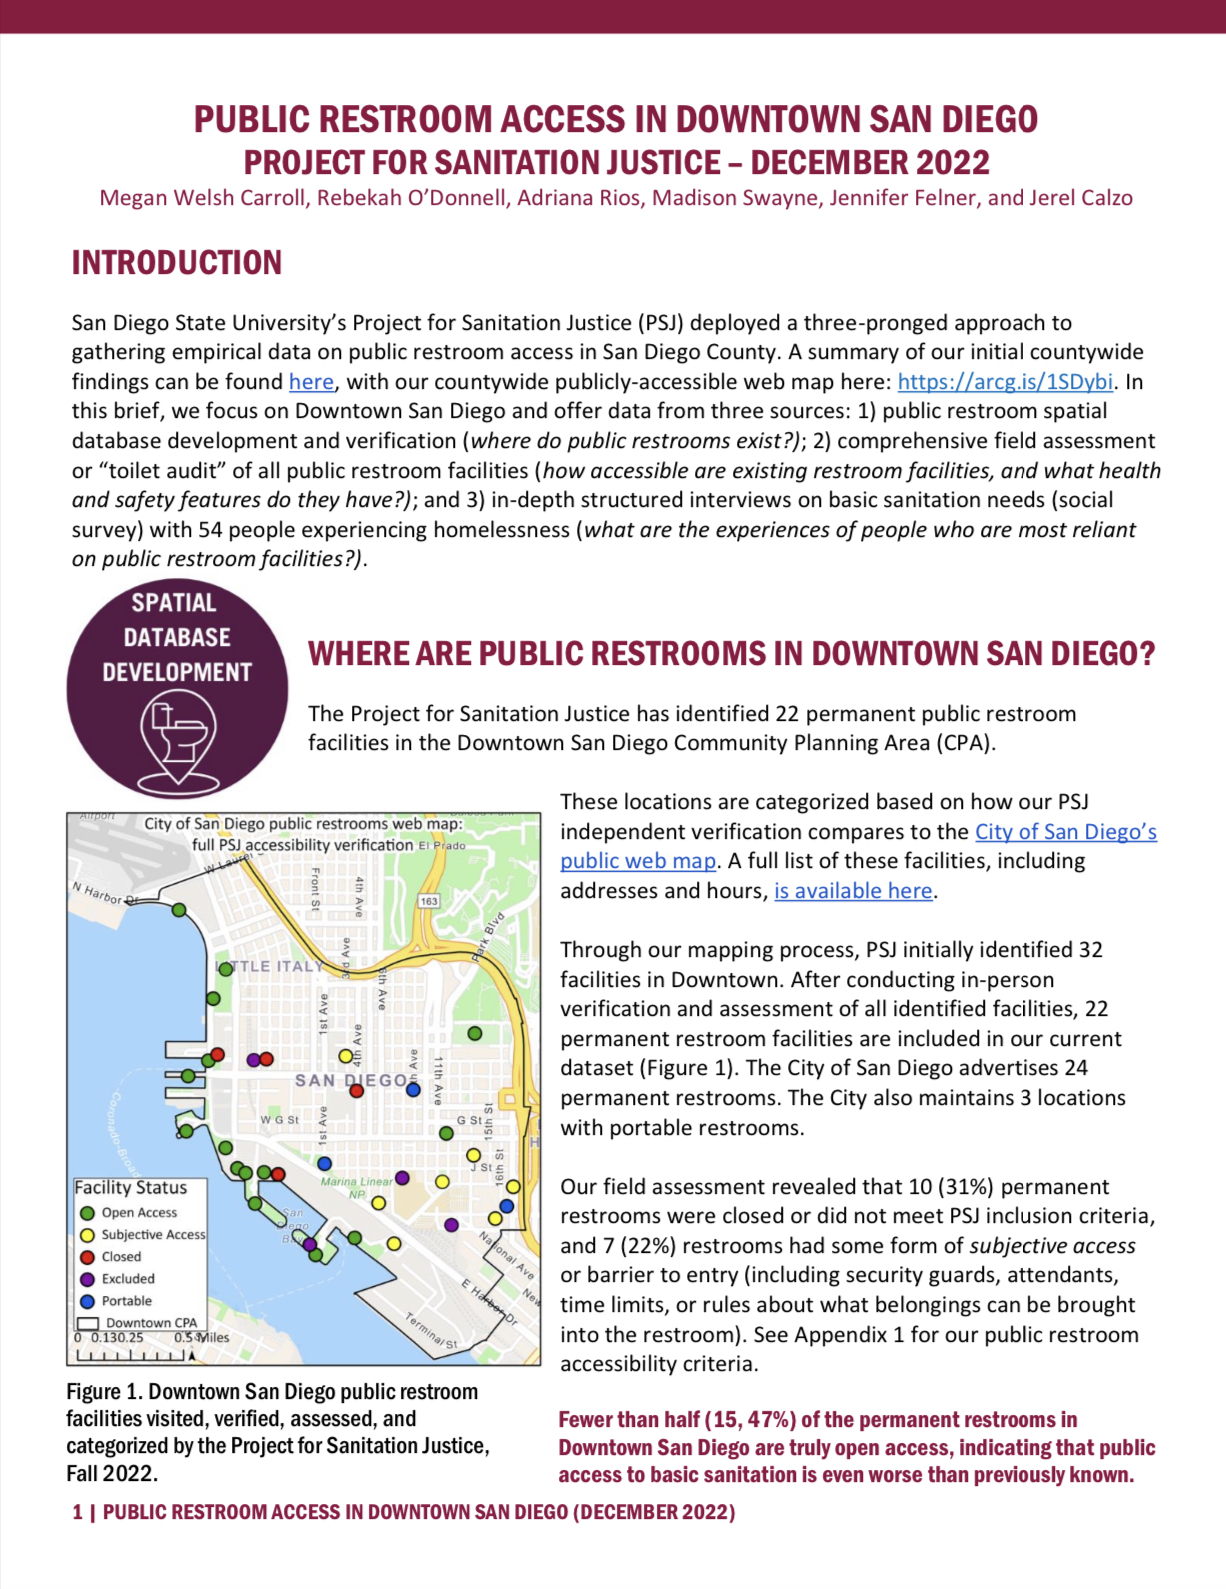 Public Restrooms in San Diego County: A Regional Assessment